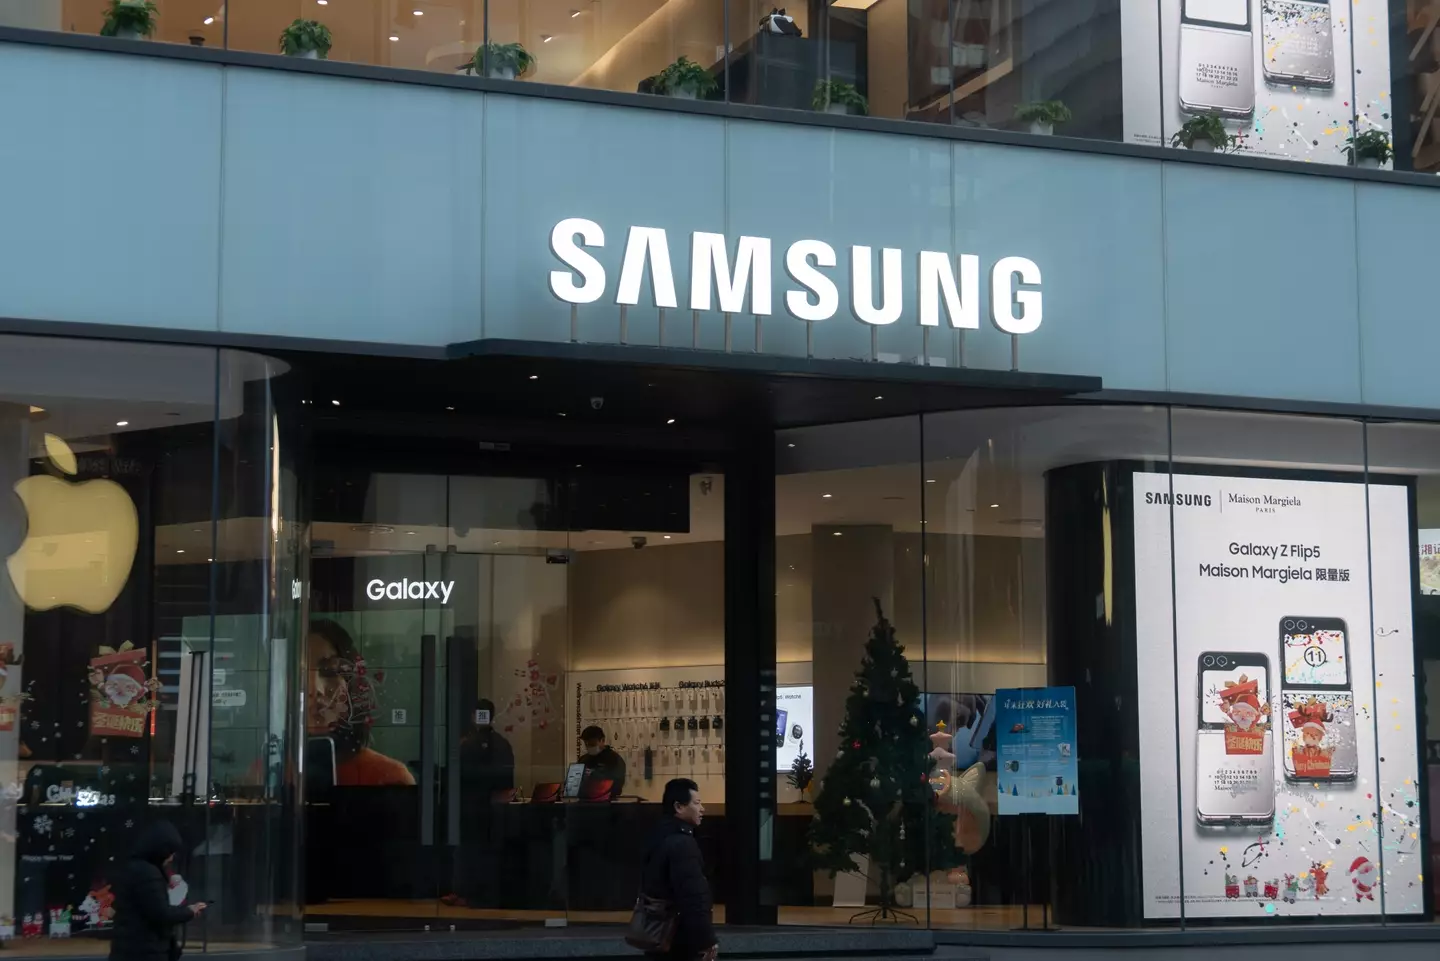 Samsung is gearing up to reveal its new generation of smartphones.